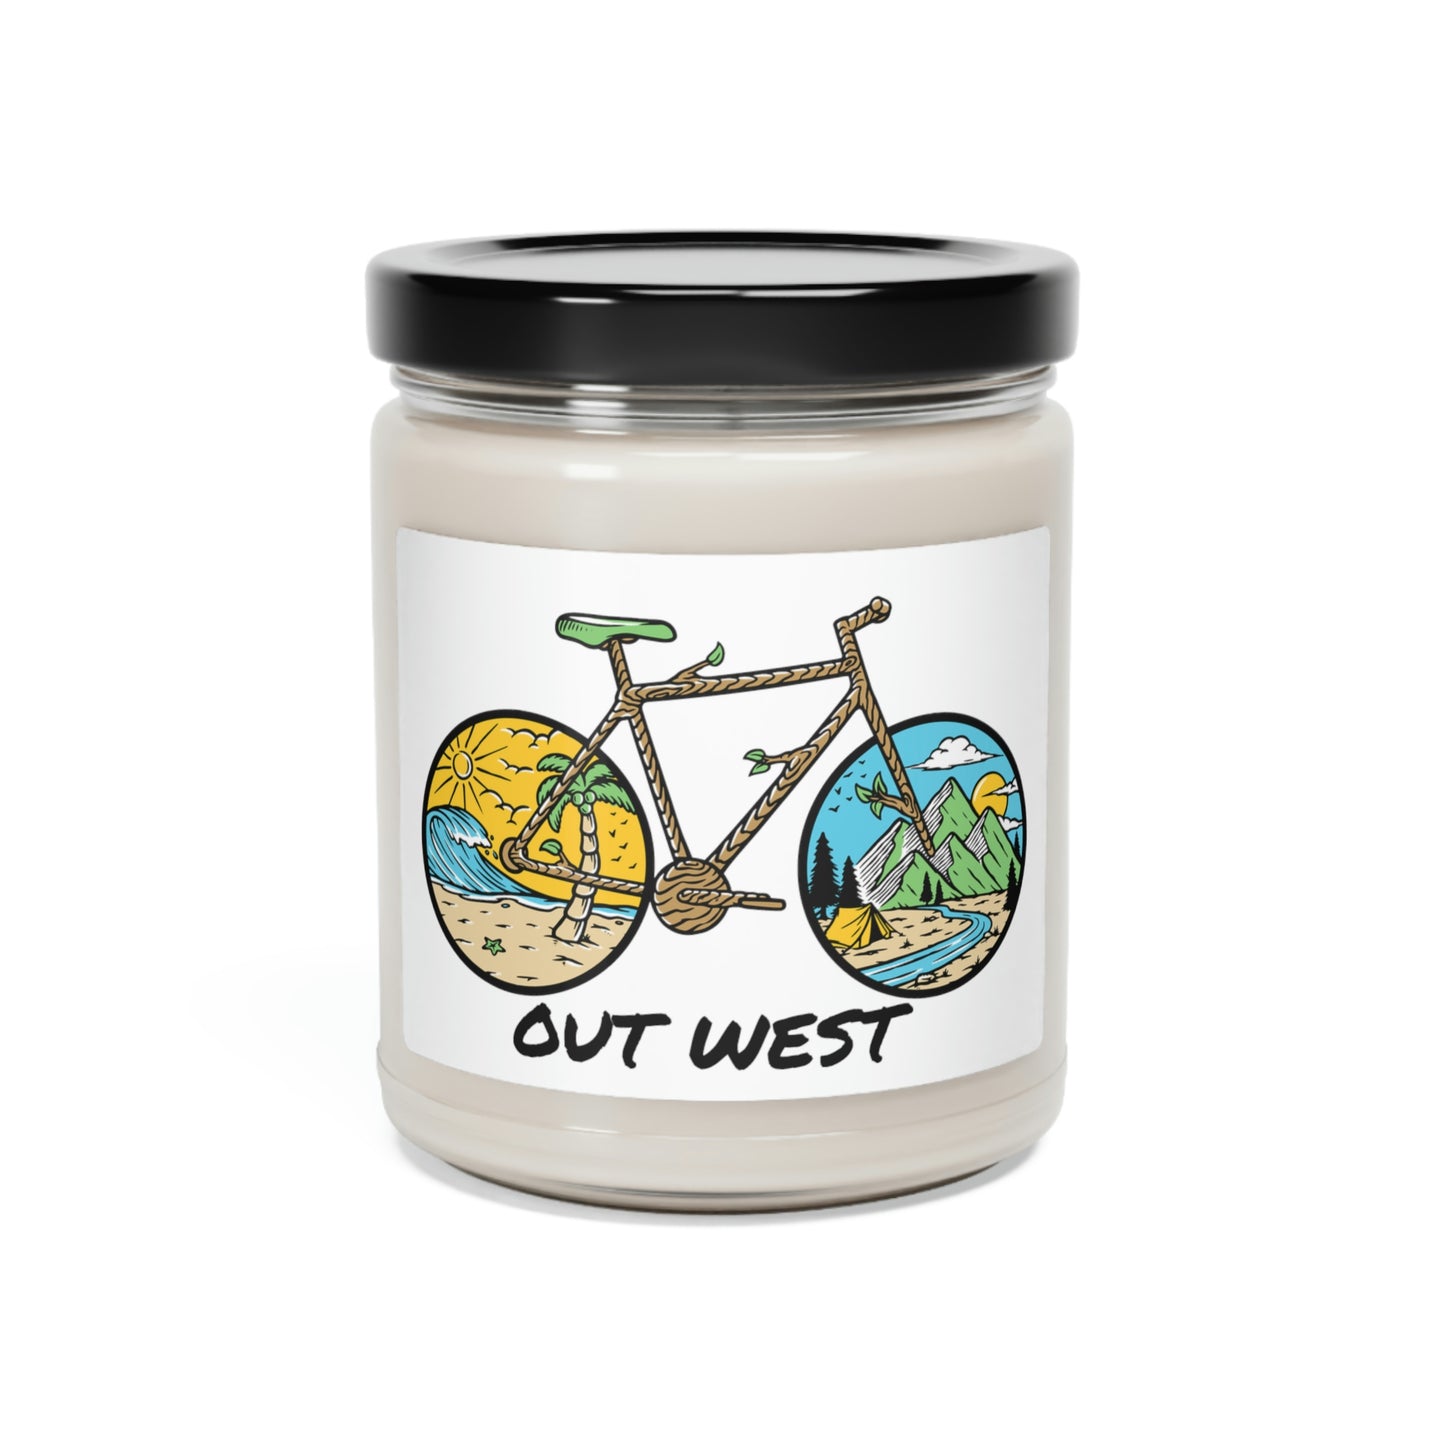 Out West Scented Soy Candle, 9oz